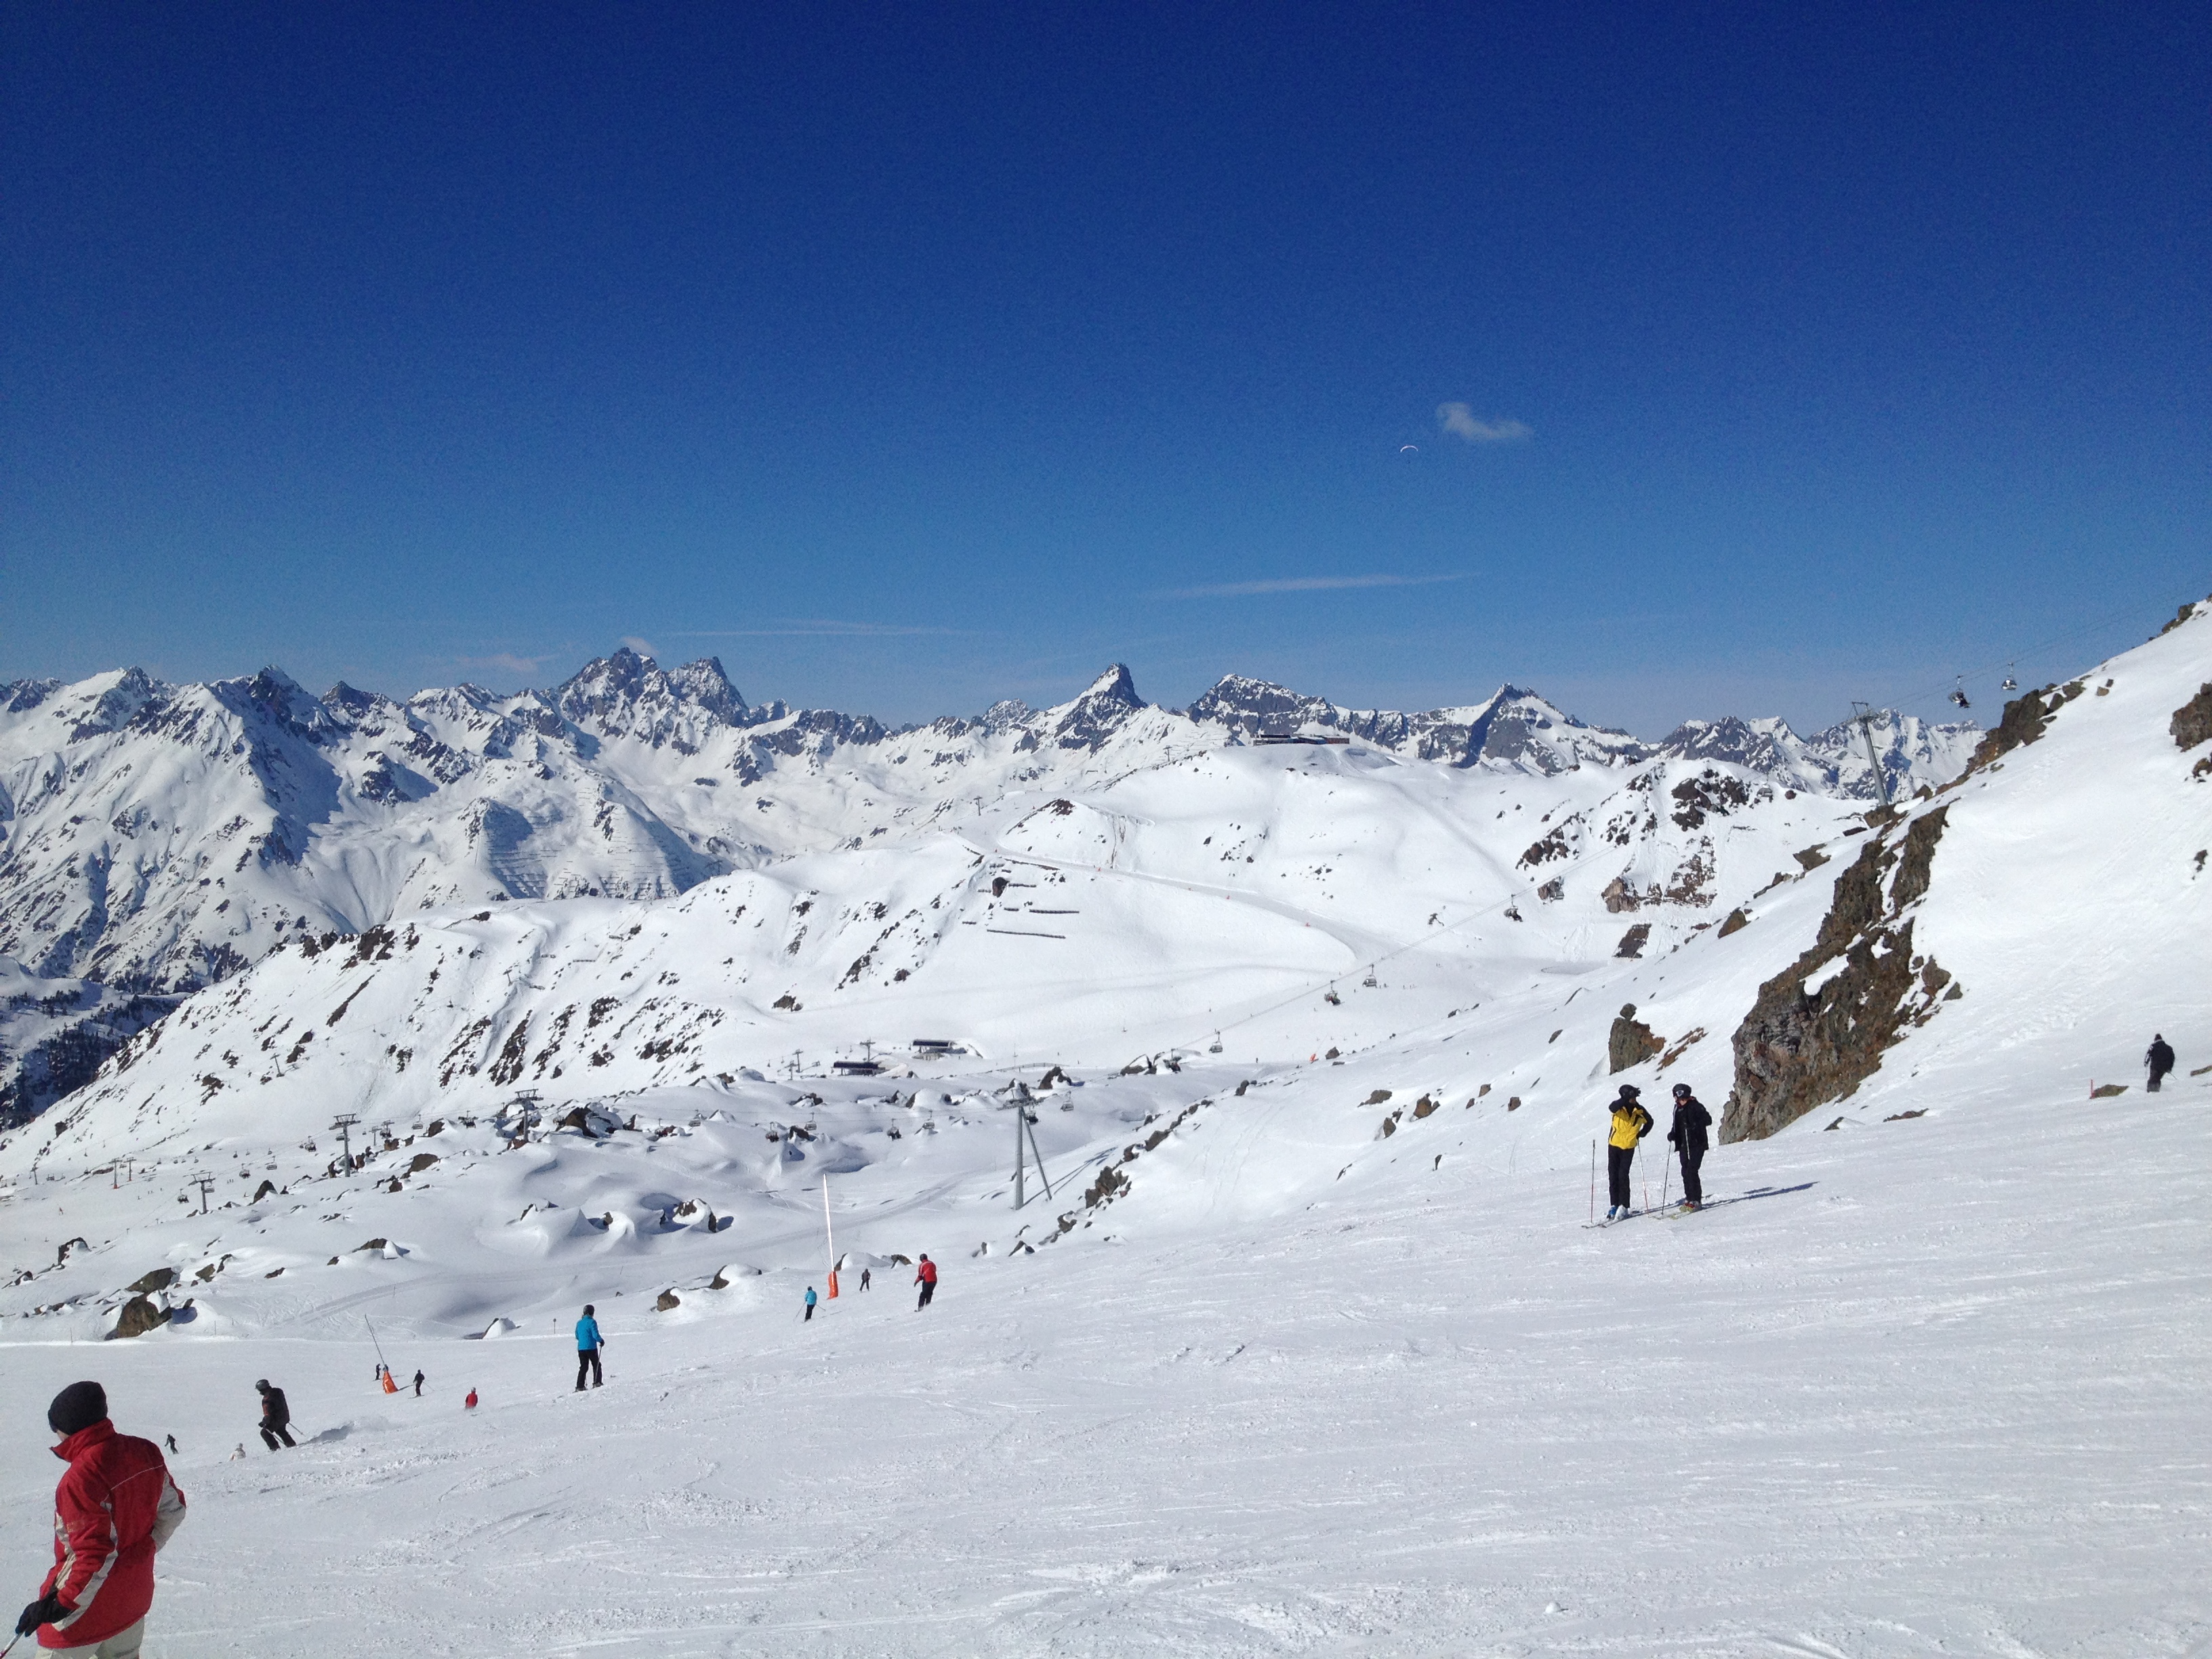 Looking down to Idalpe, Ischgl